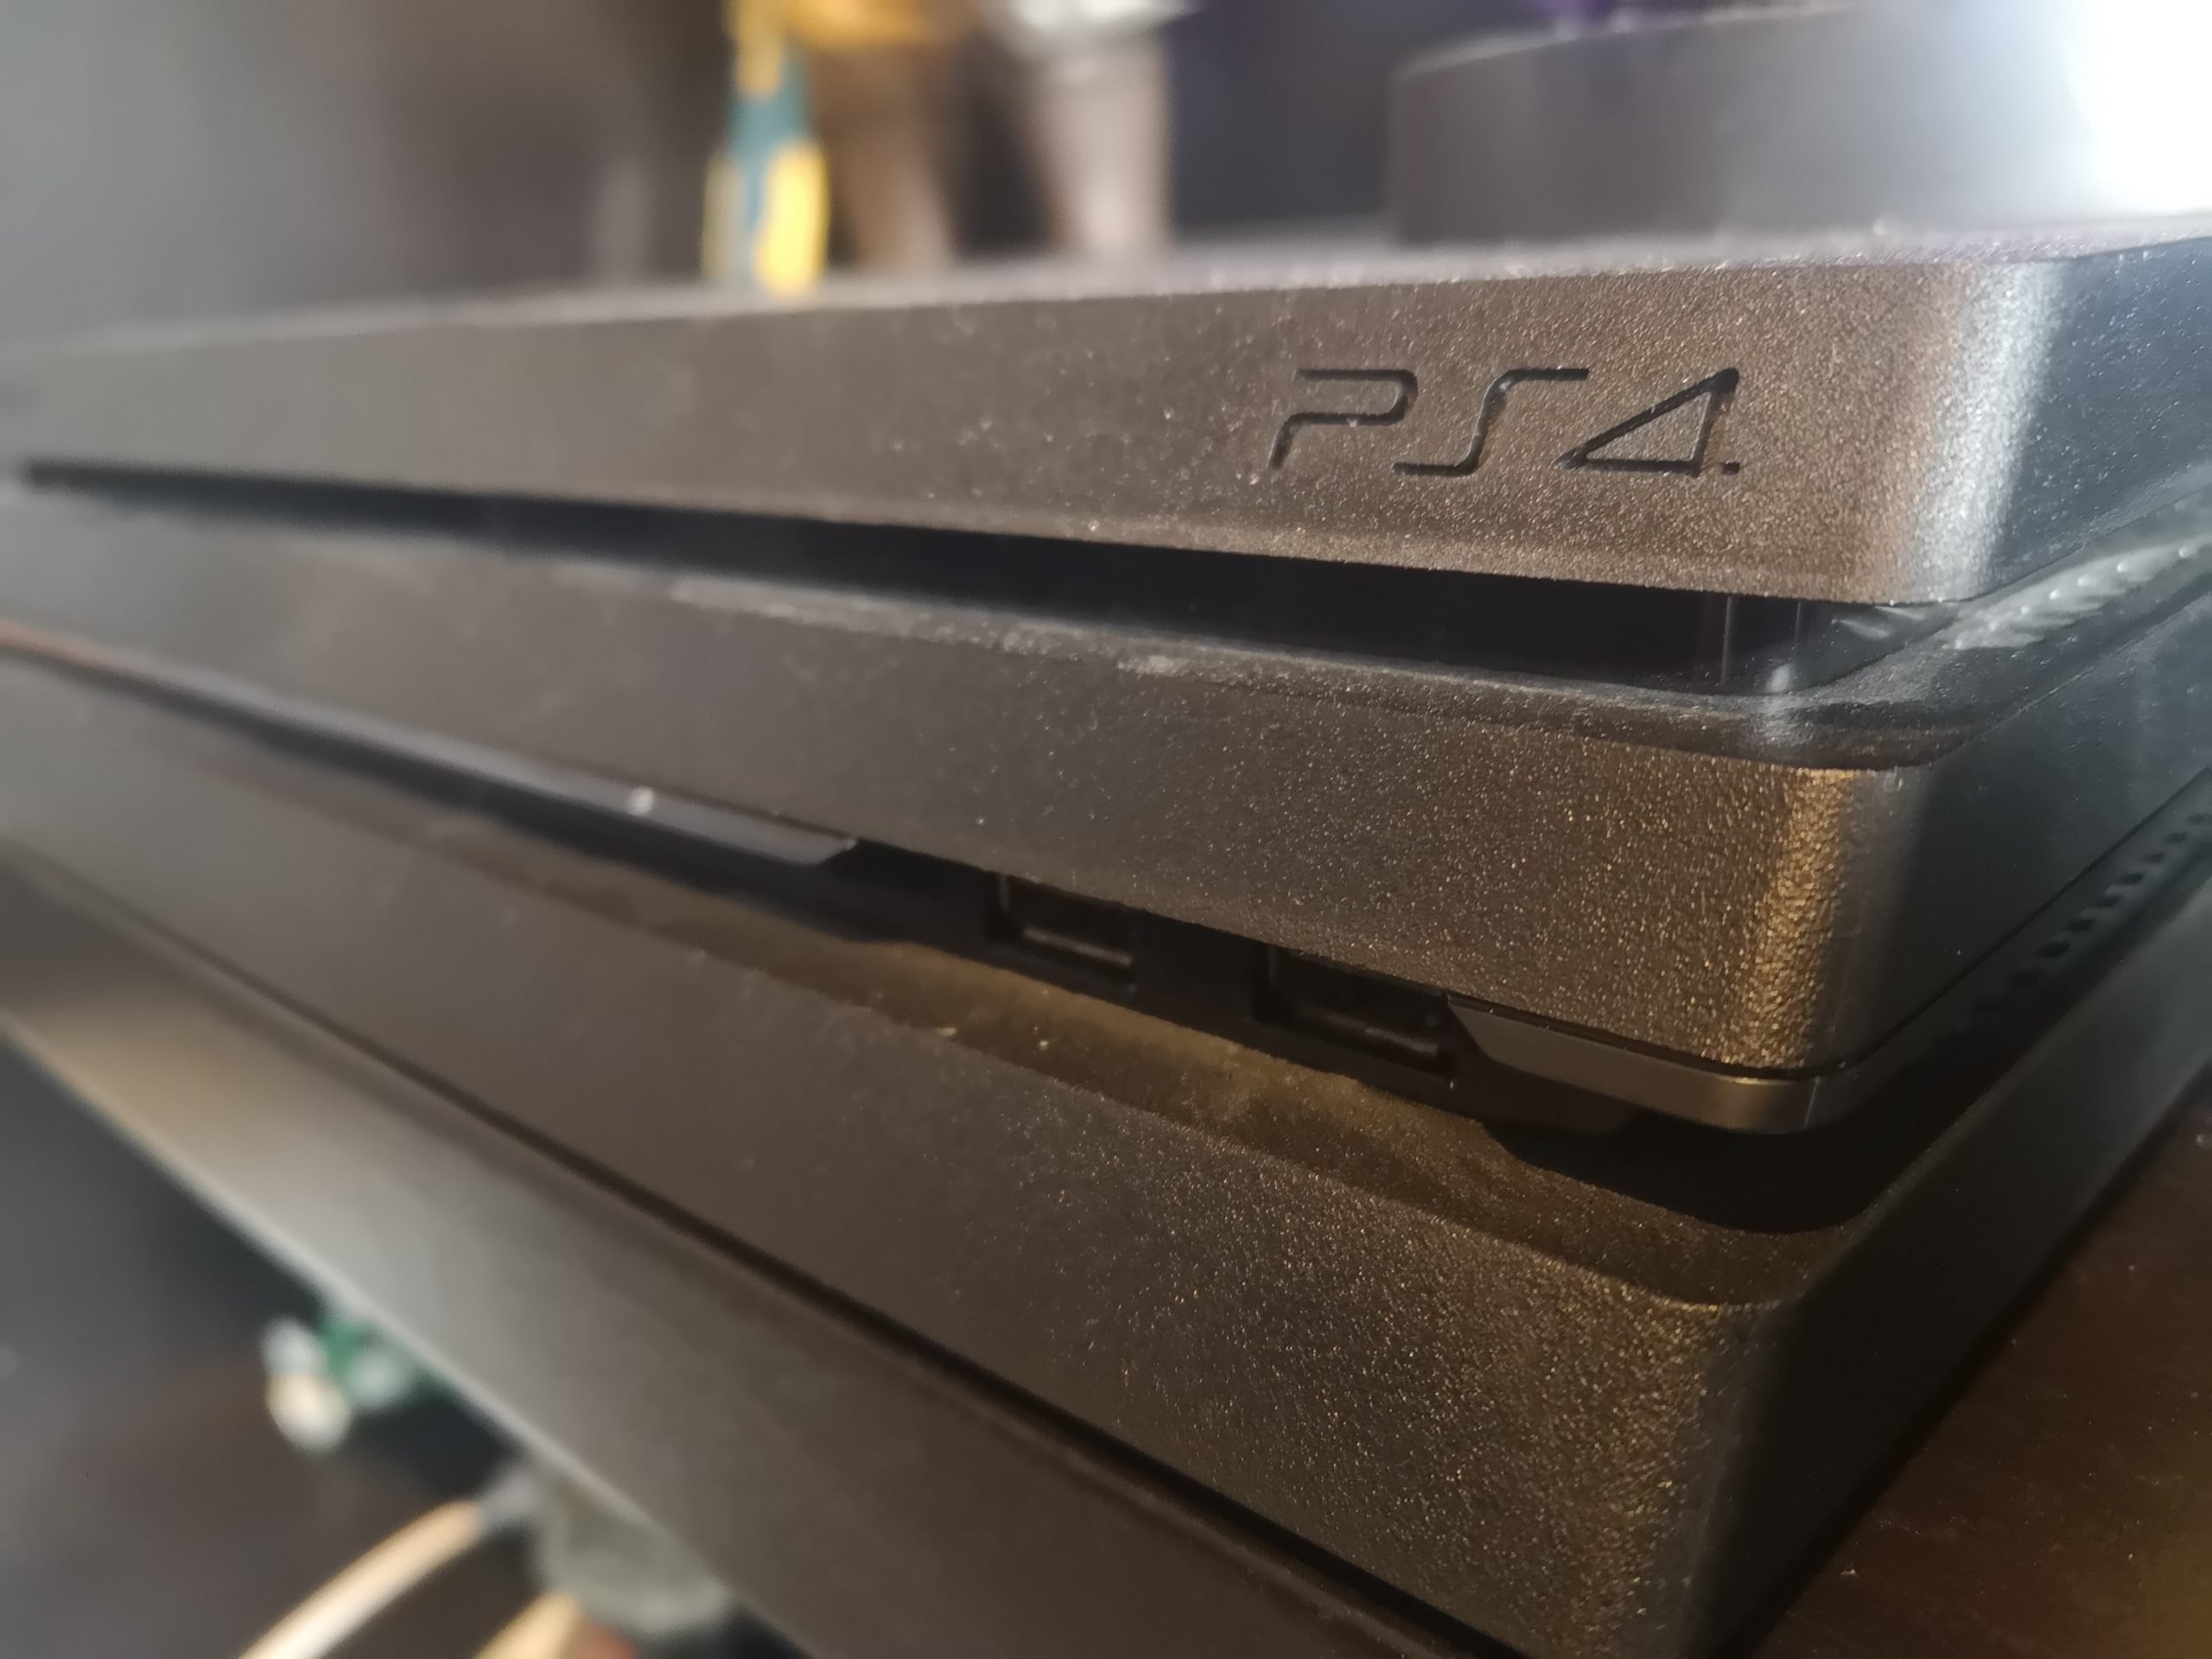 Solved] [Fixed] Beeps Once And Turns Off - PlayStation 4